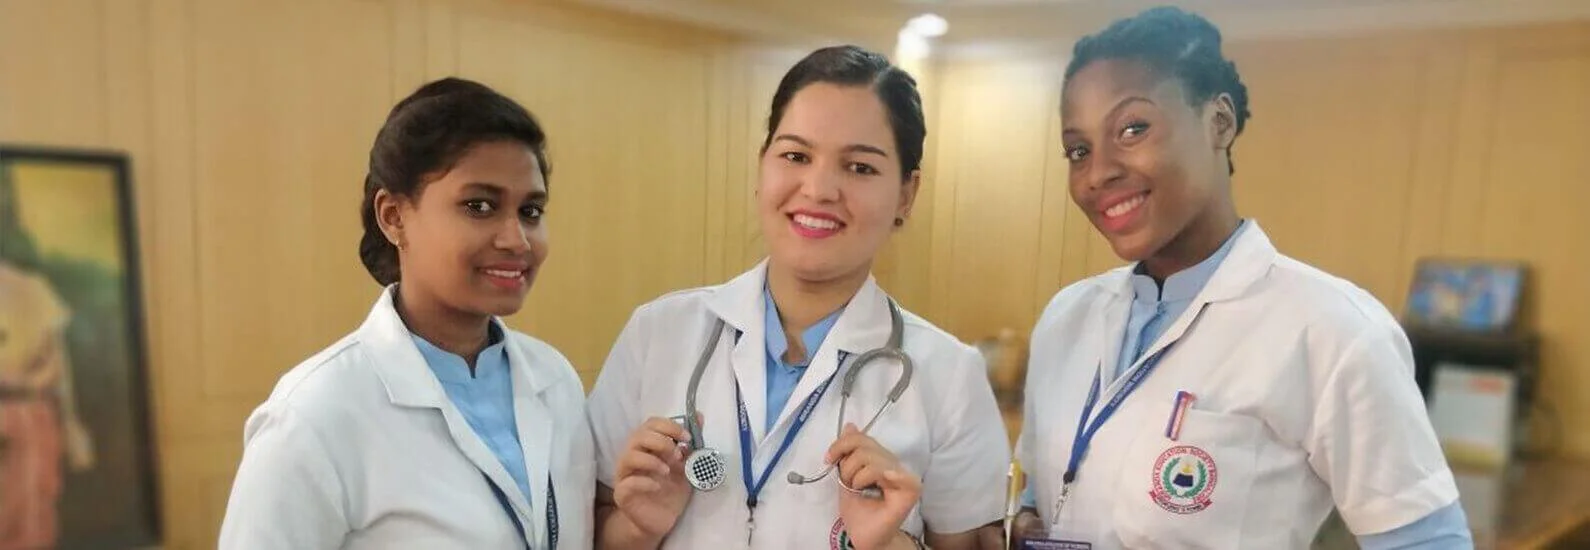 Banner Image of Happy Students at Miranda College of Nursing in Uniforms.